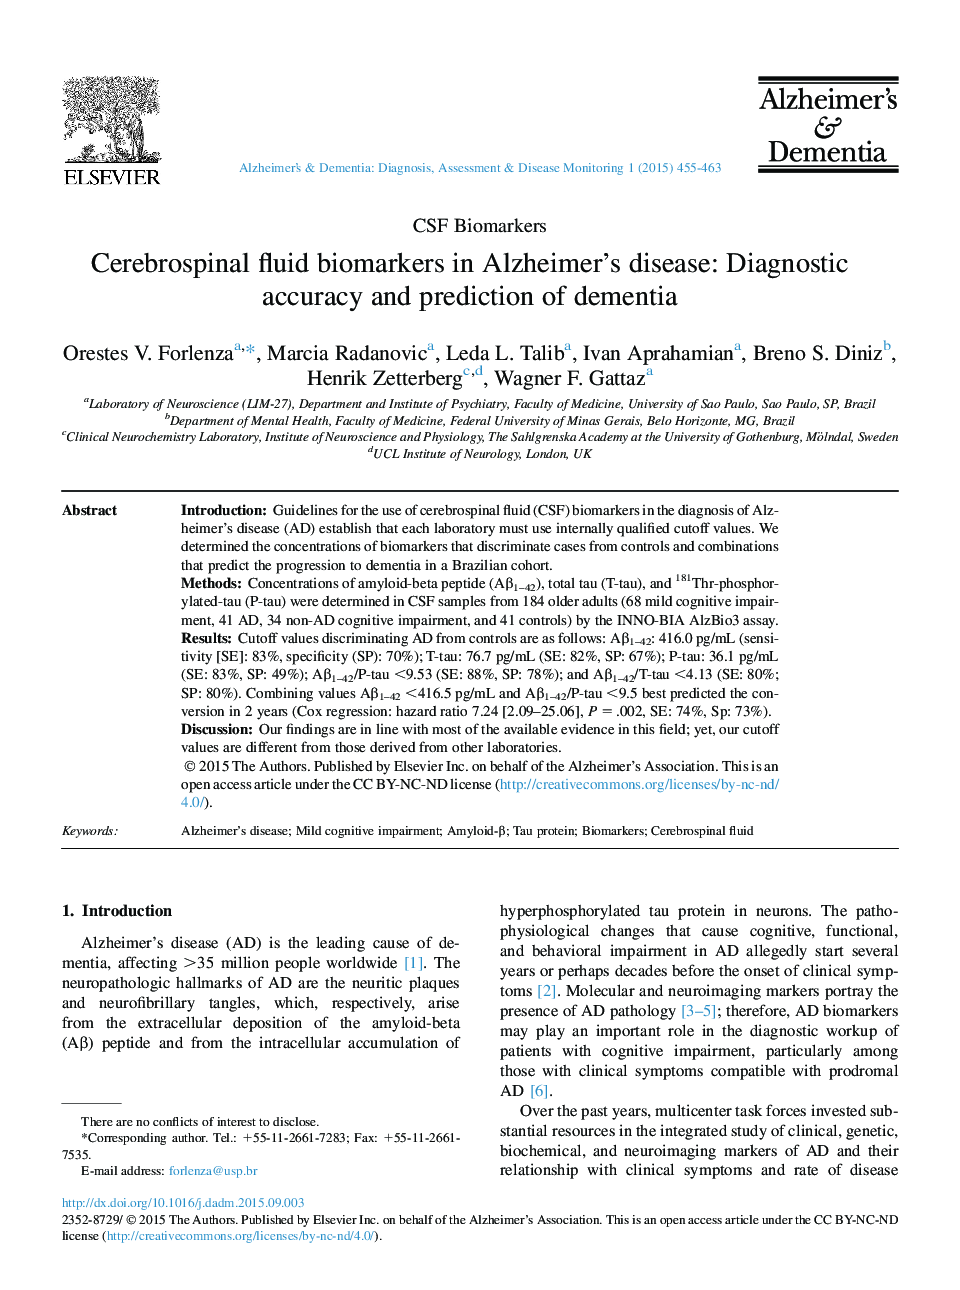 Cerebrospinal fluid biomarkers in Alzheimer's disease: Diagnostic accuracy and prediction of dementia 